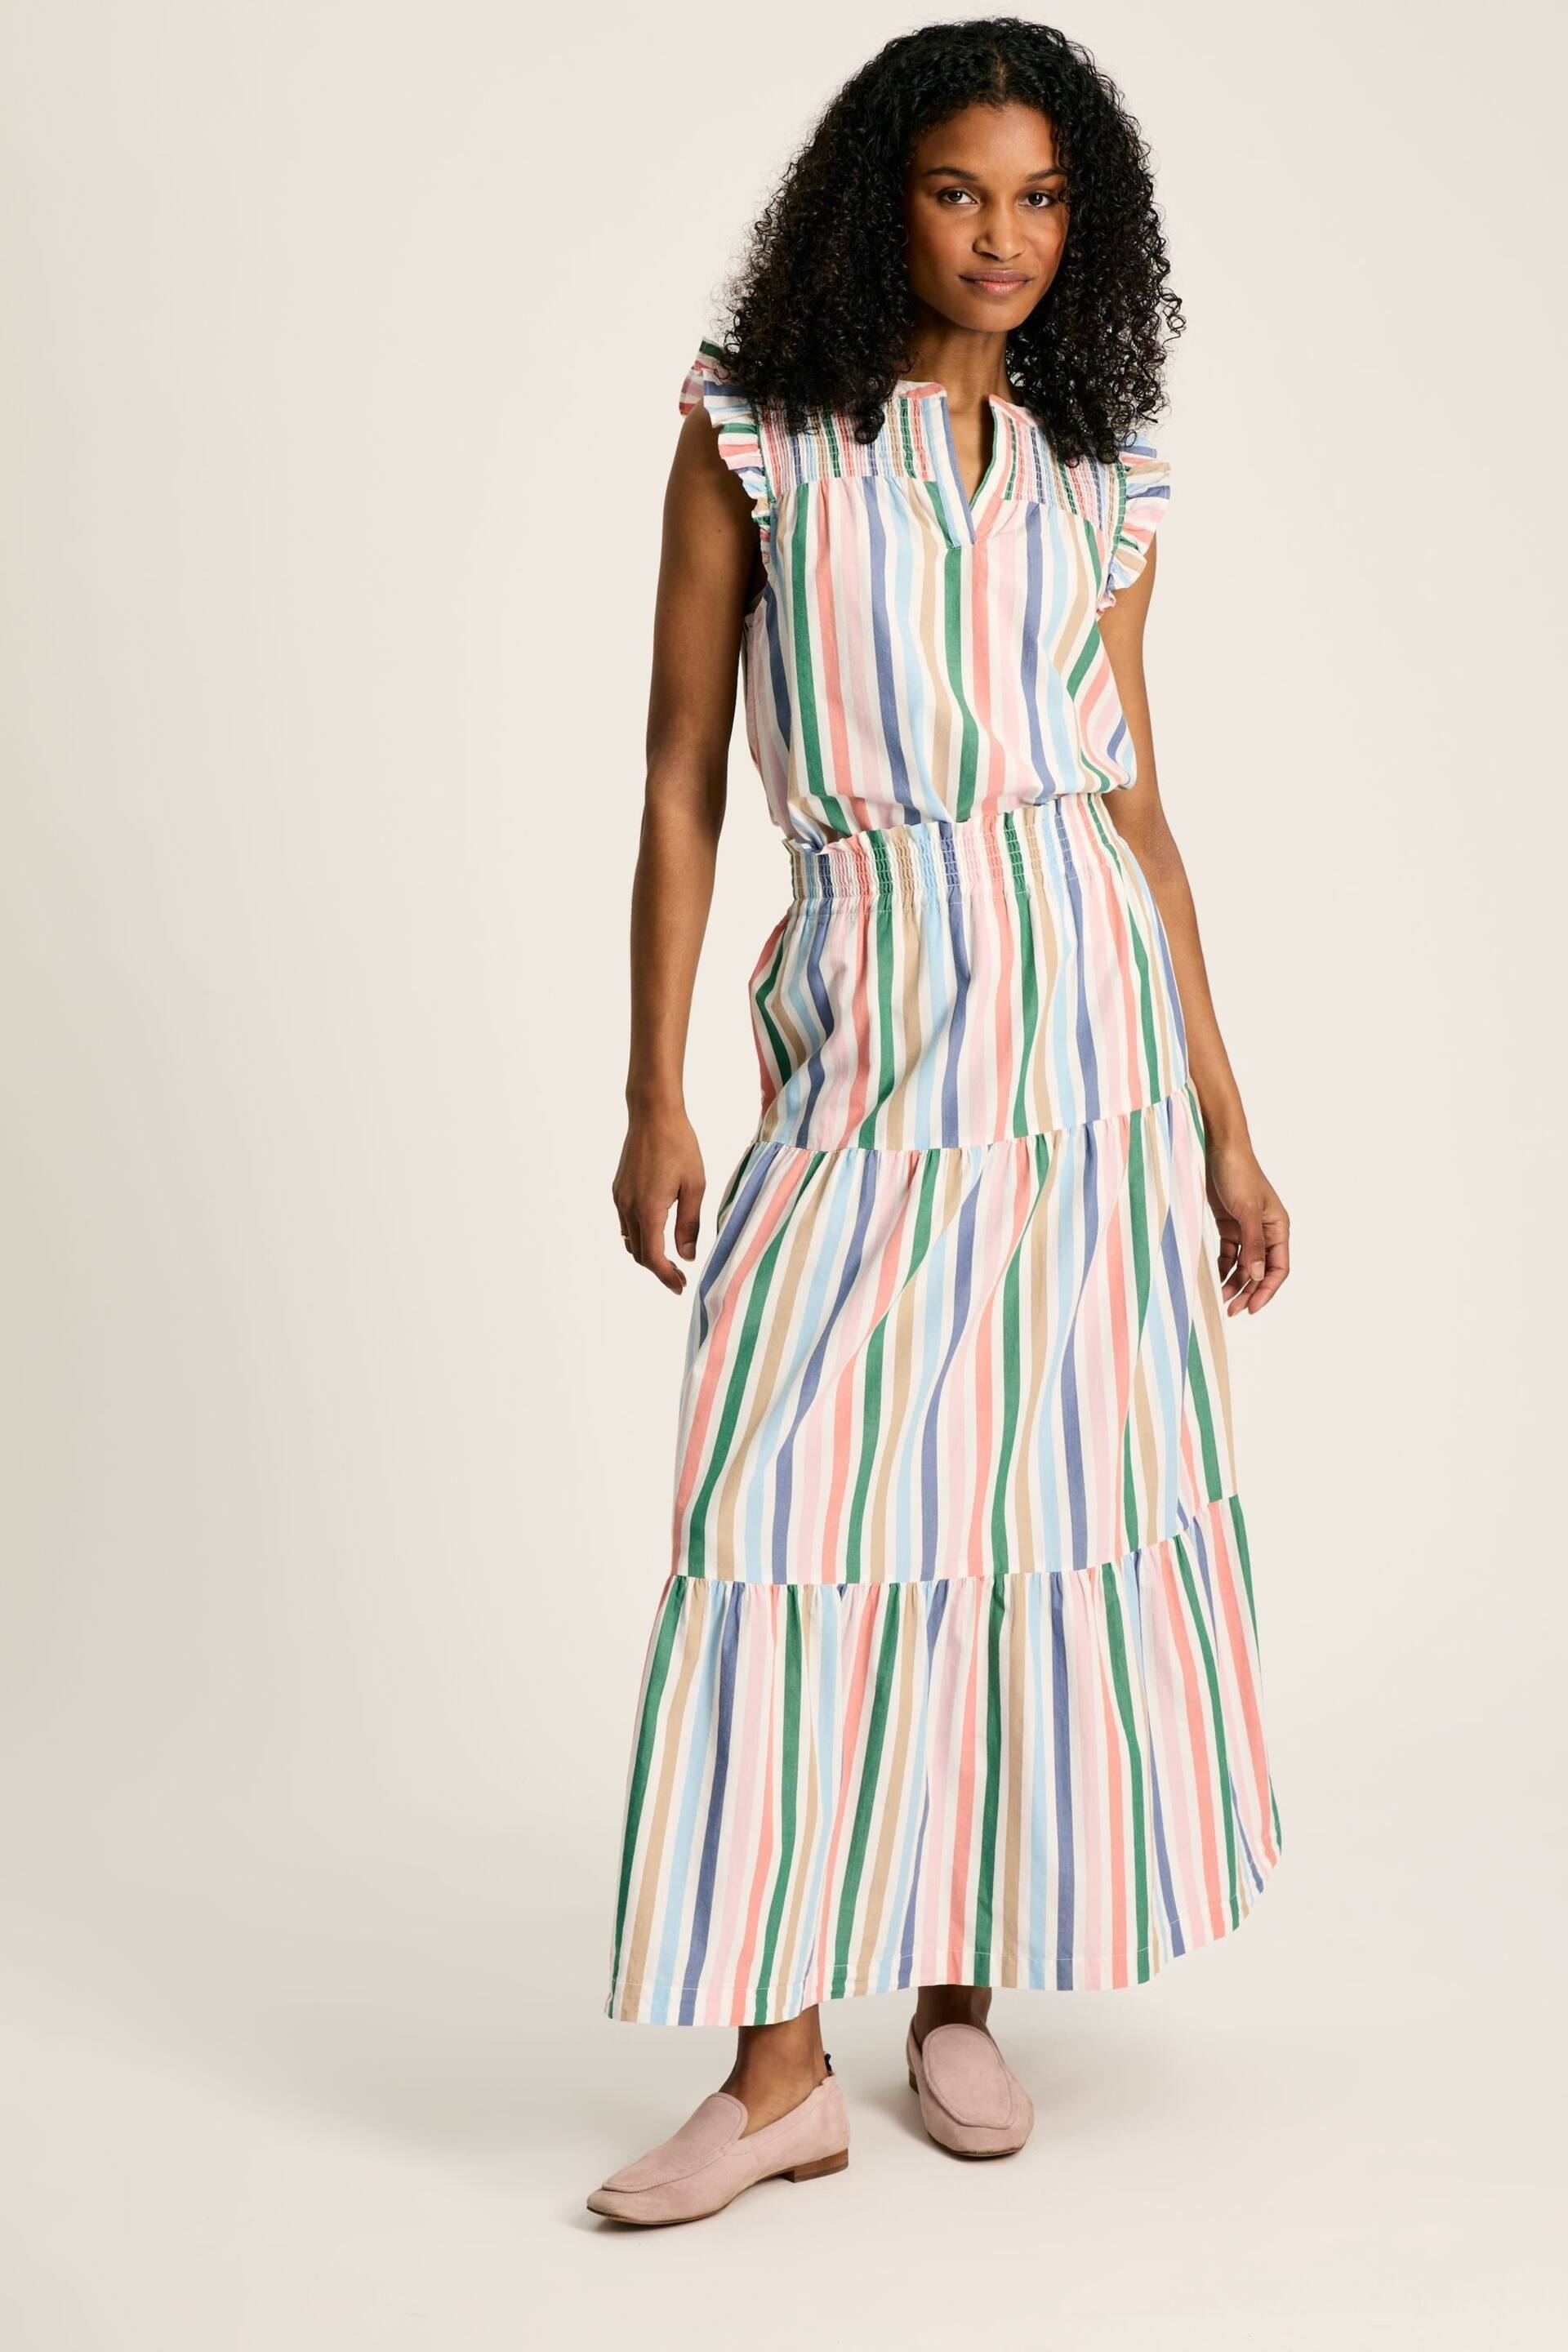 Joules Cynthia Stripe Tiered Co-ord Skirt - Image 4 of 8